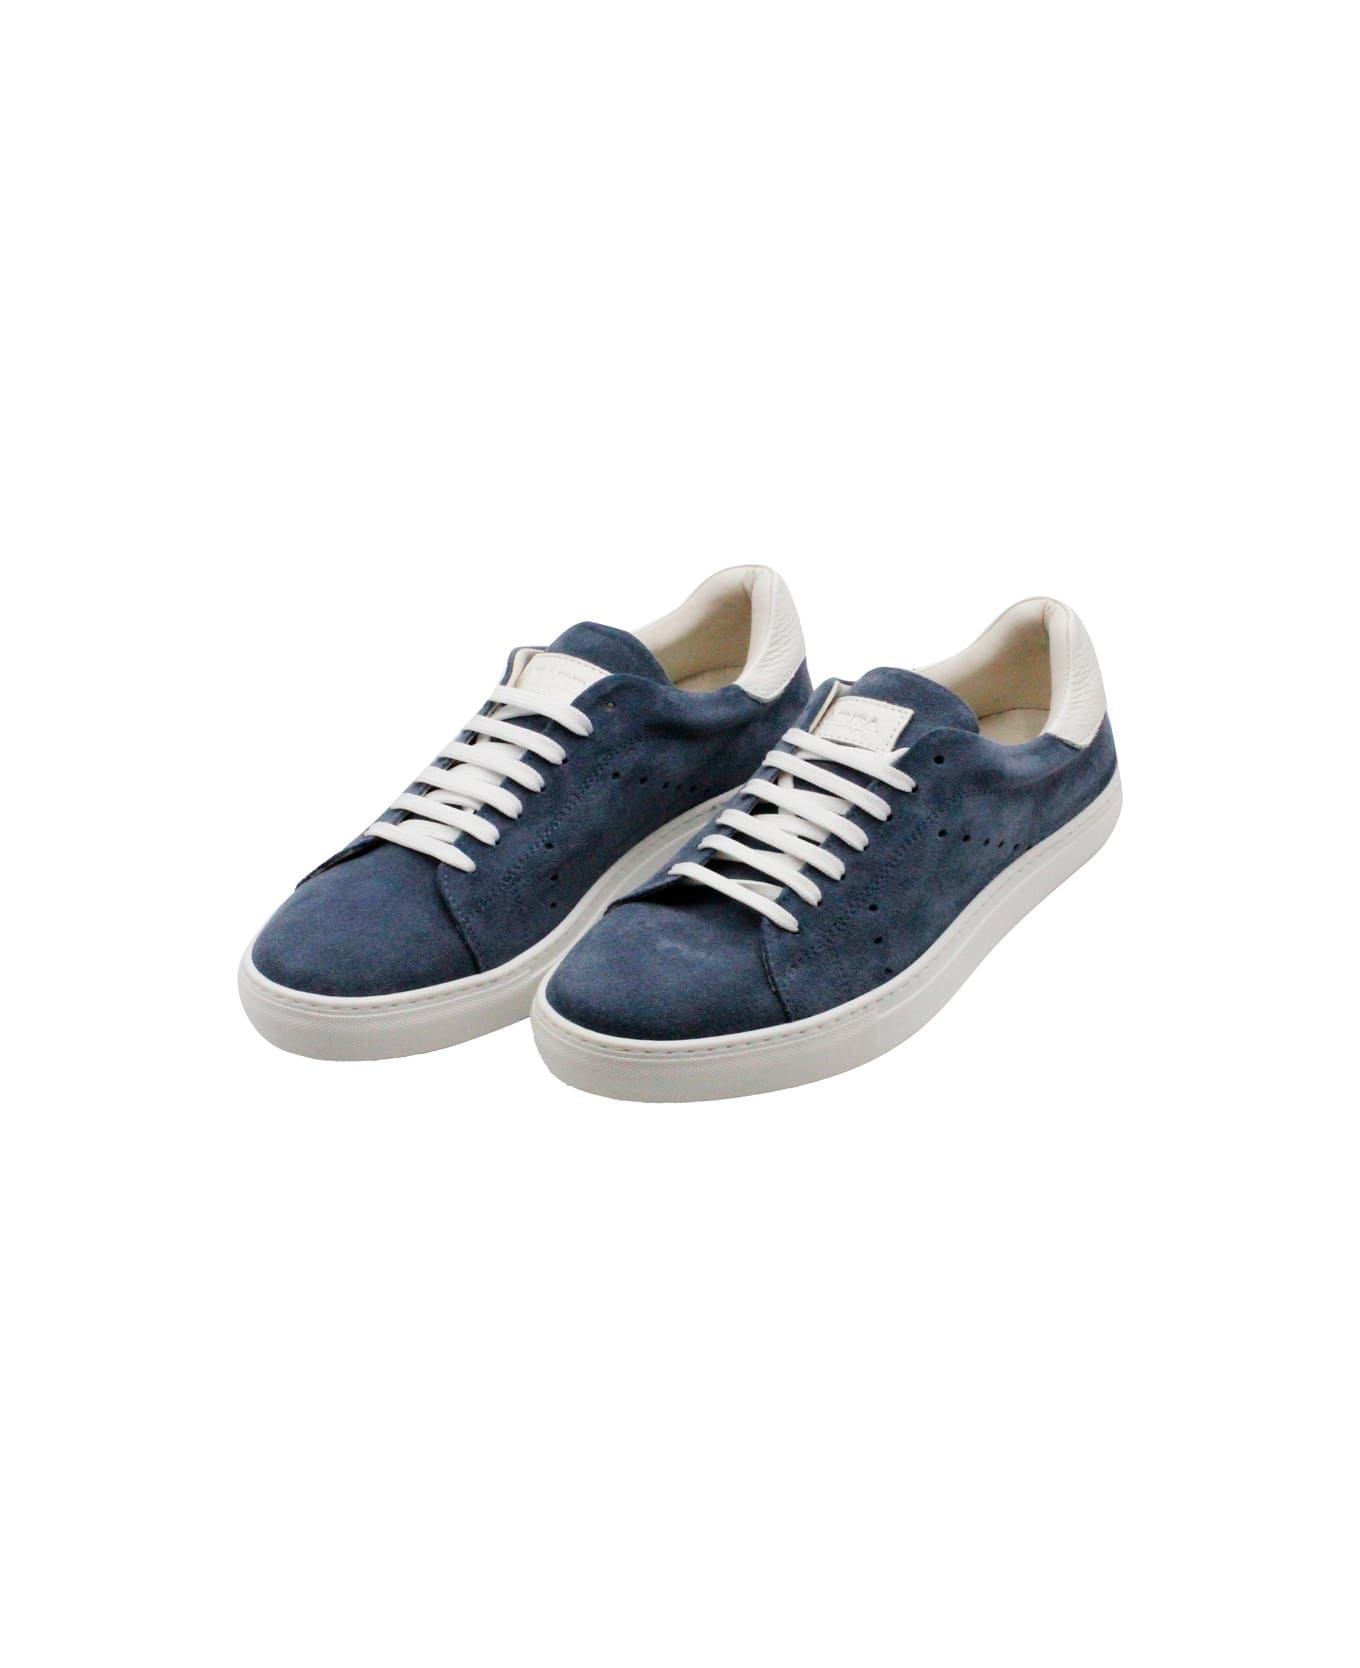 Barba Napoli Sneakers In Soft And Fine Perforated Suede With Lace Closure And Leather Rear Part - Light Blu スニーカー